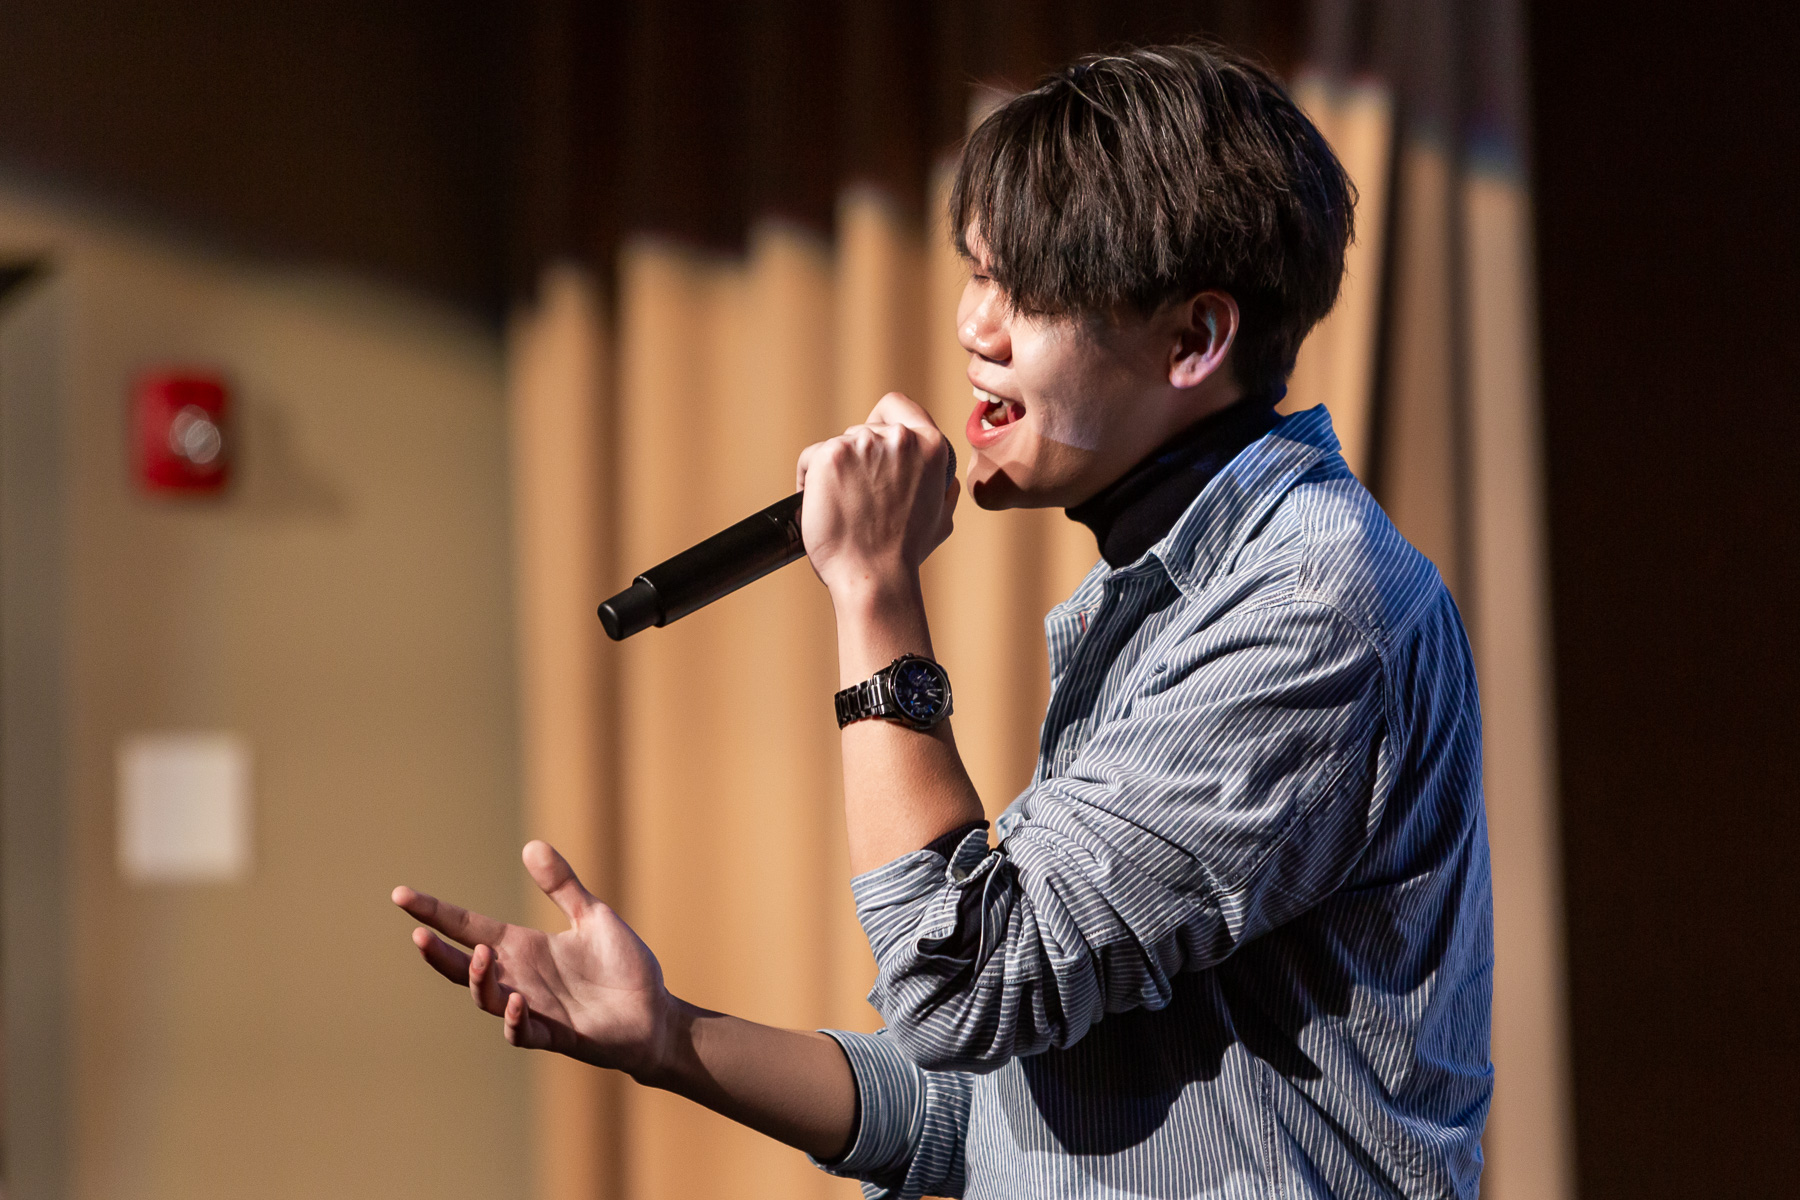 Xiangguang Liu, graduate student in the Driehaus College of Business, sings “Untainted” during the lunar new celebration. (DePaul University/Randall Spriggs)